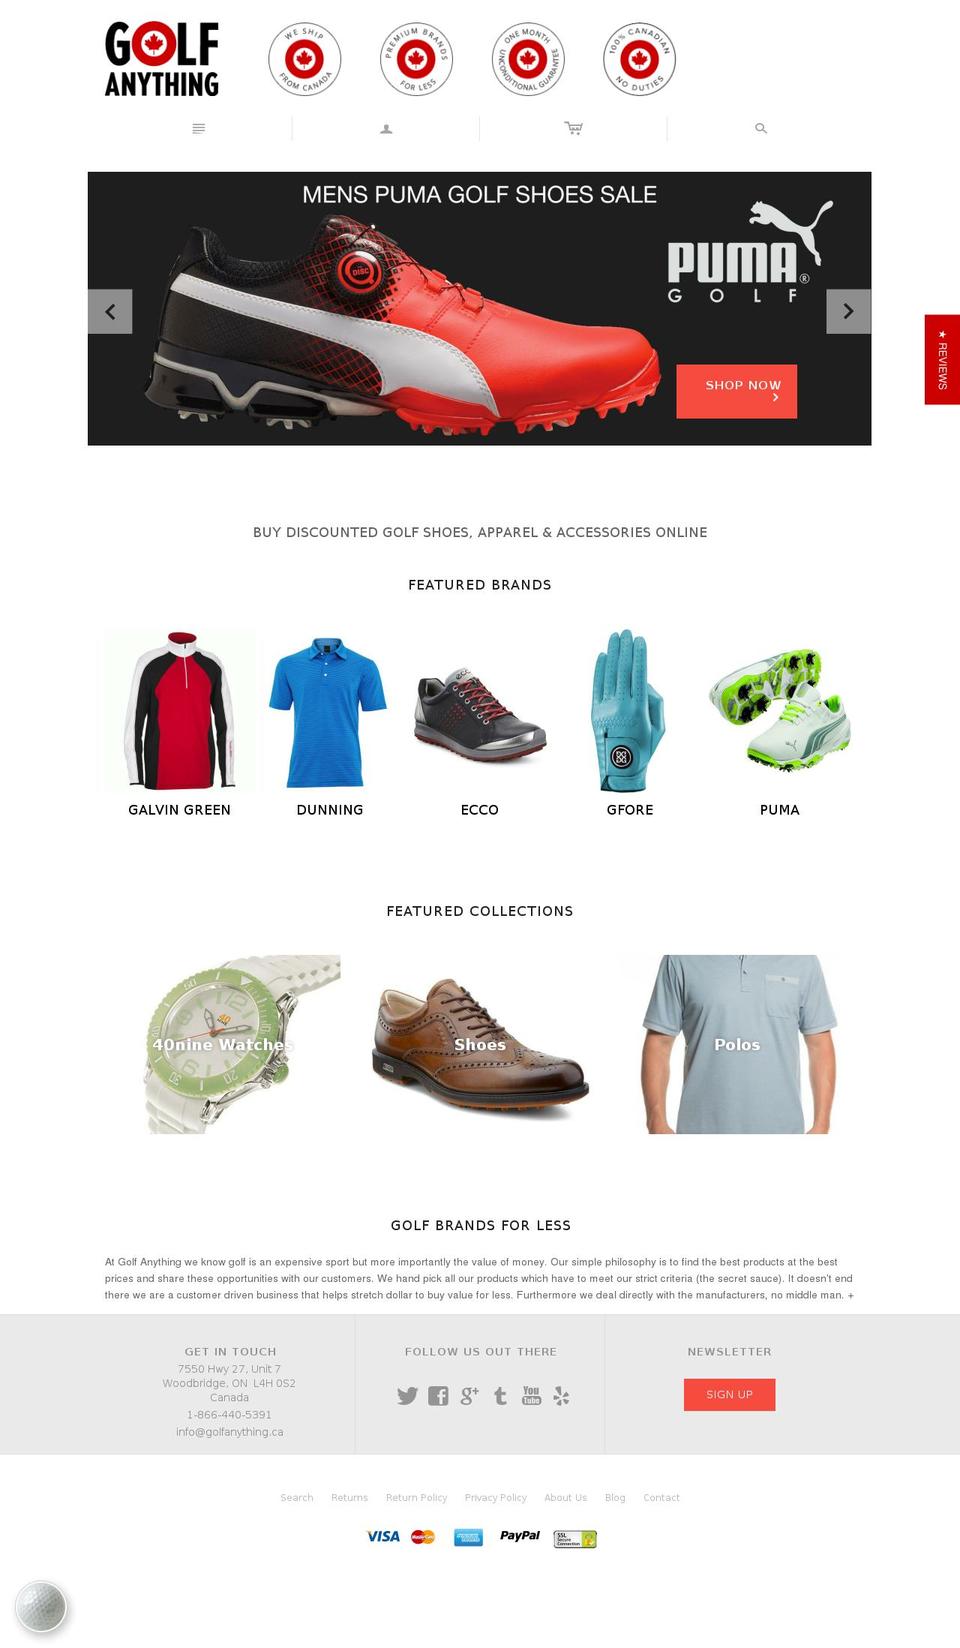 Expanse Shopify theme site example golfanything.ca